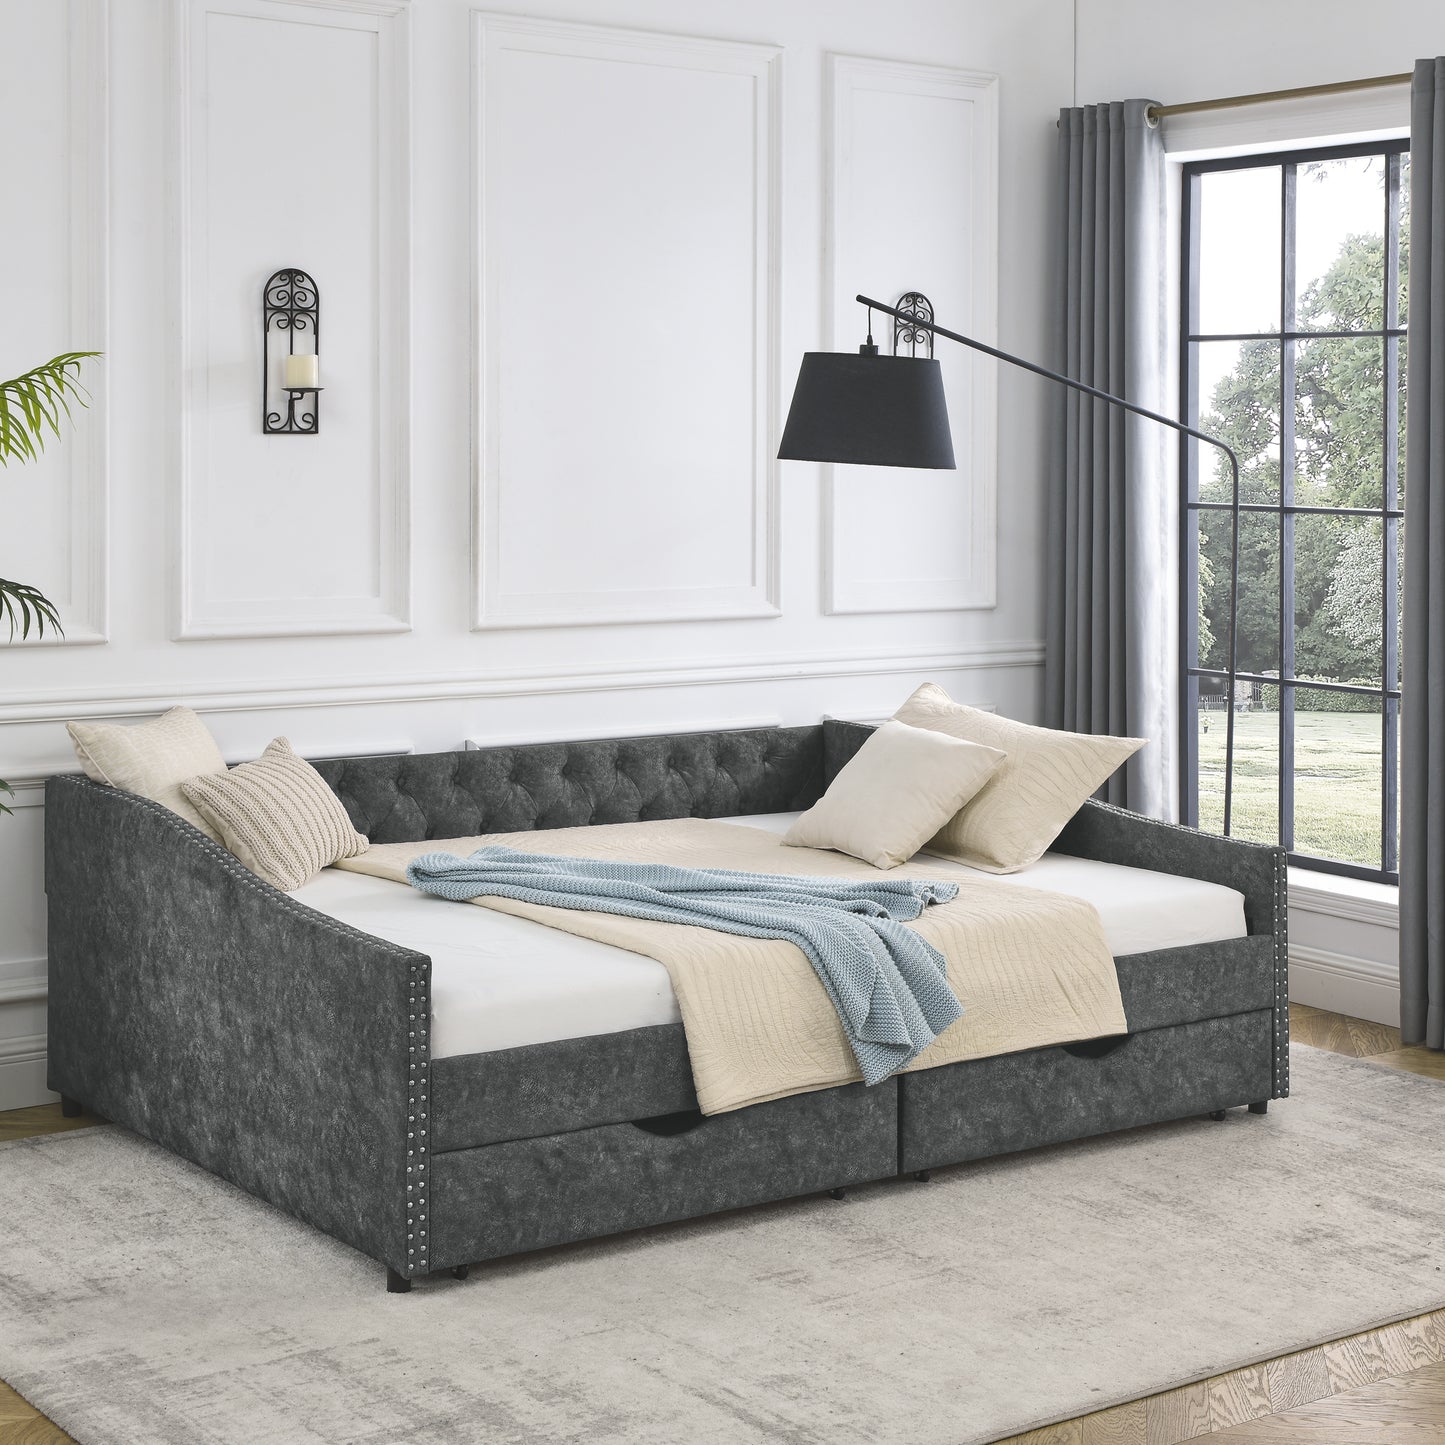 upholstered tufted daybed sofa bed with drawers, grey